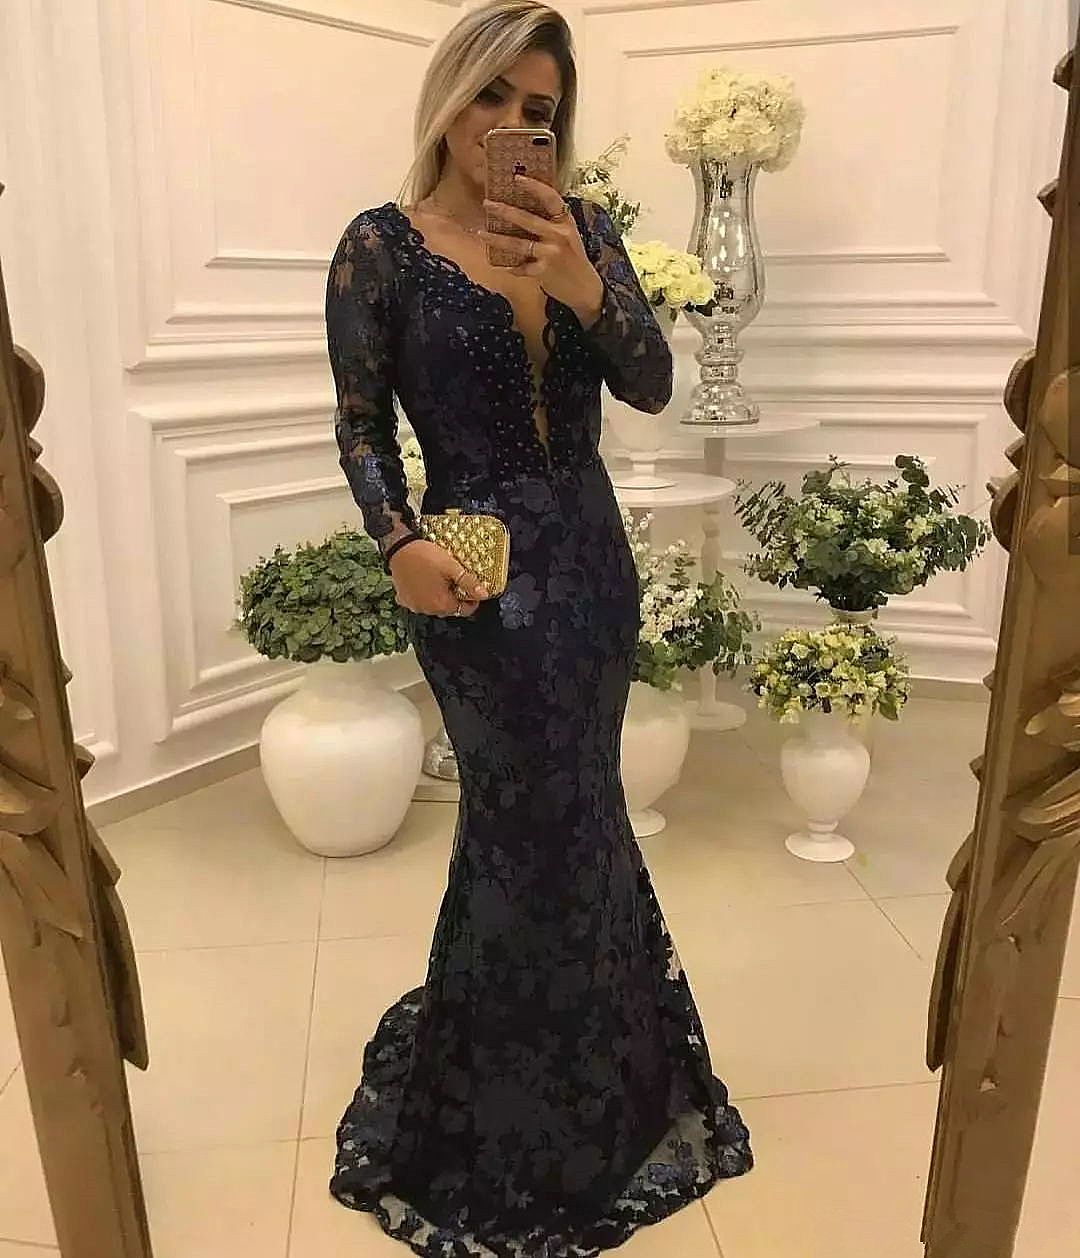 https://www.bambidress.com/images/mother-of-the-bride-dresses/md0025-sexy-blue-lace-mother-of-the-bride-groom-dresses_0_.jpg